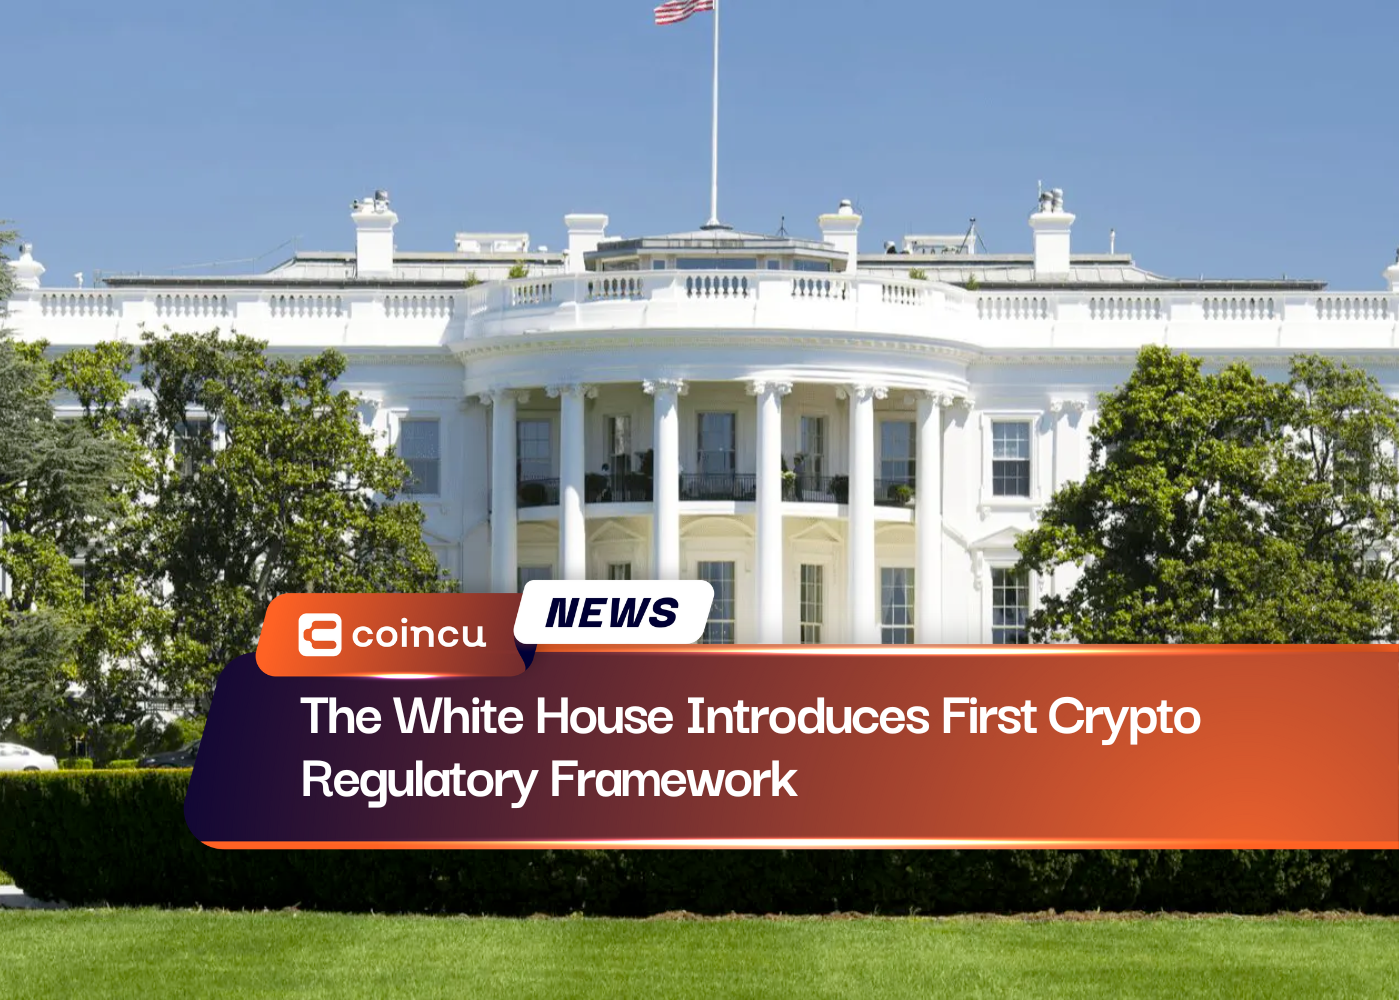 The White House Introduces First Crypto Regulatory Framework